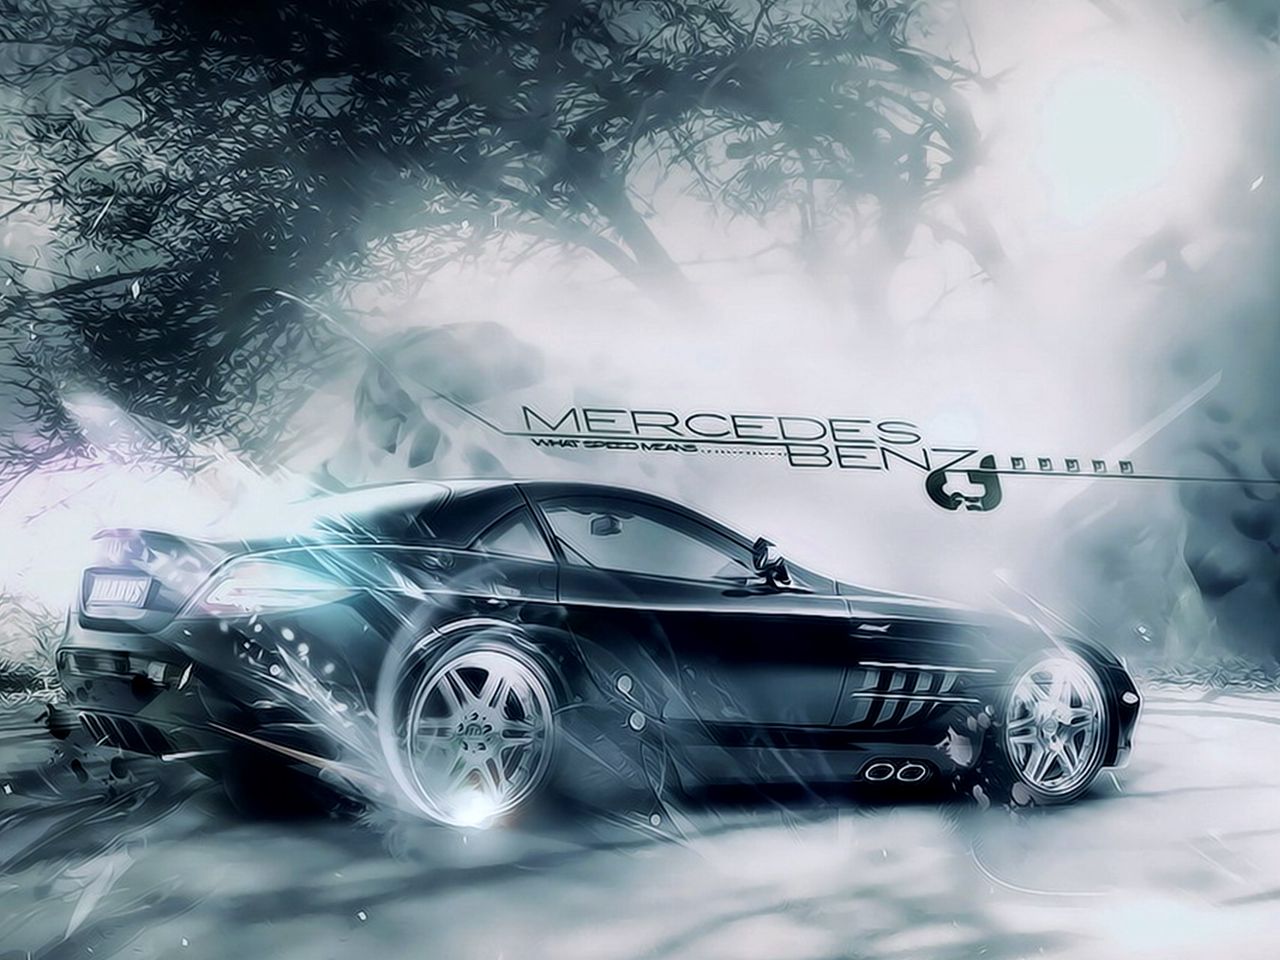 Black cars Hot and stylish HD Wallpapers collection free